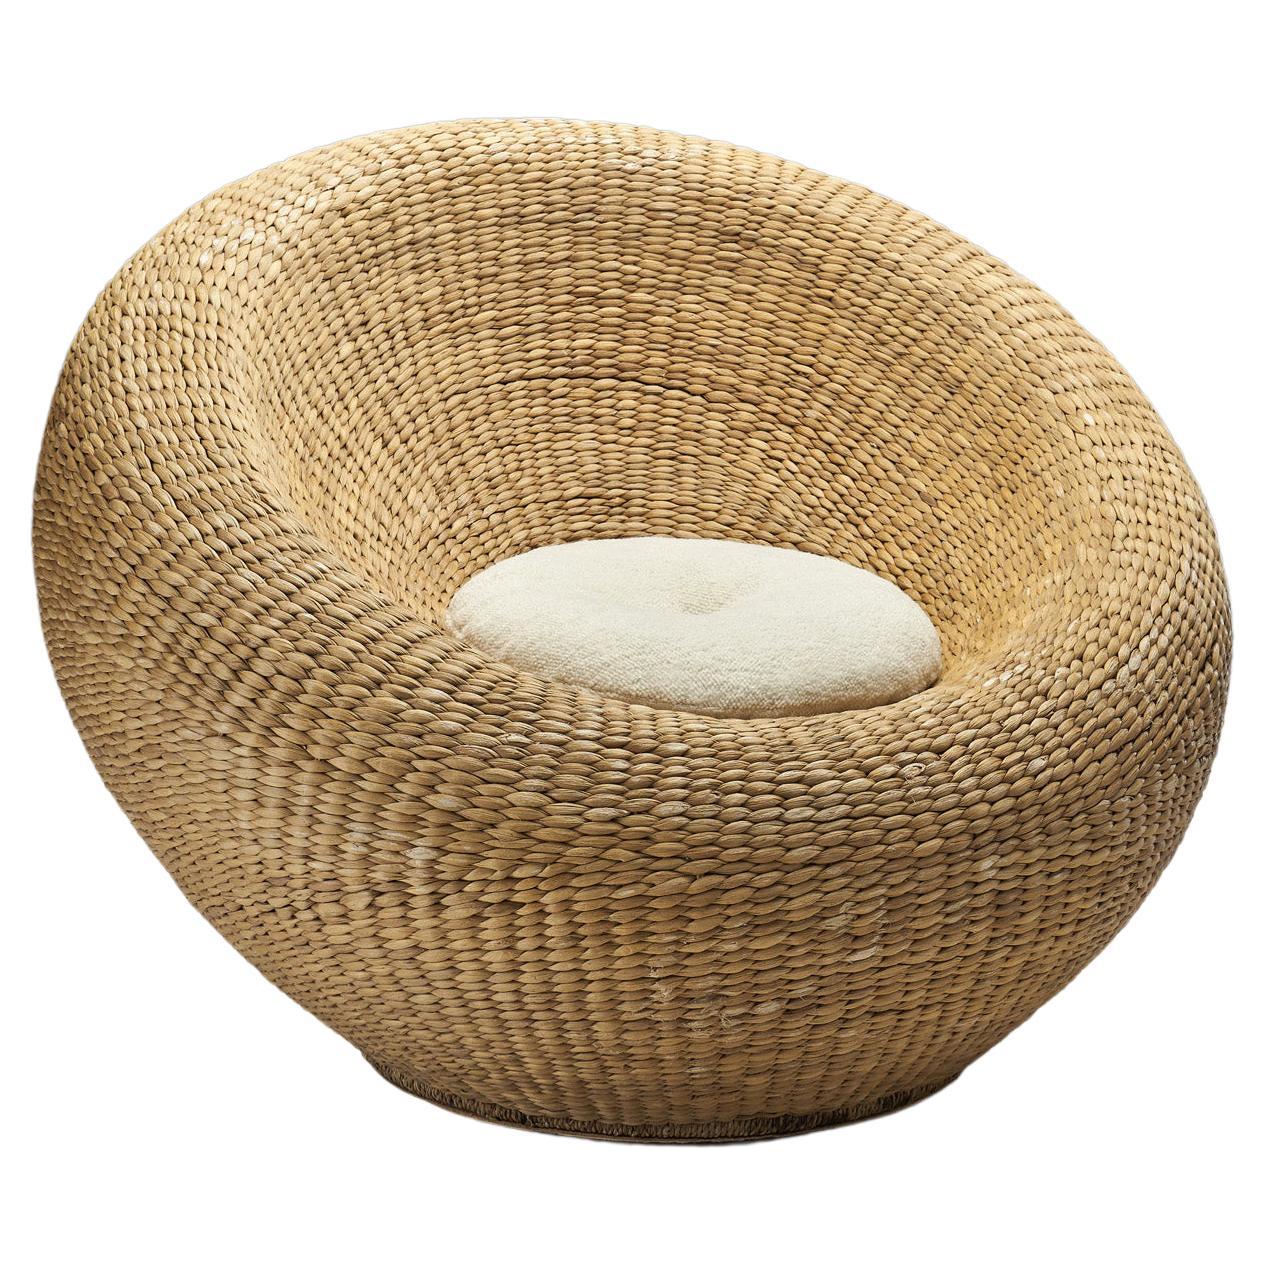 Woven Wicker Bird's Nest Chair in the Manner of Isamu Kenmochi, Europe, ca 1960s For Sale